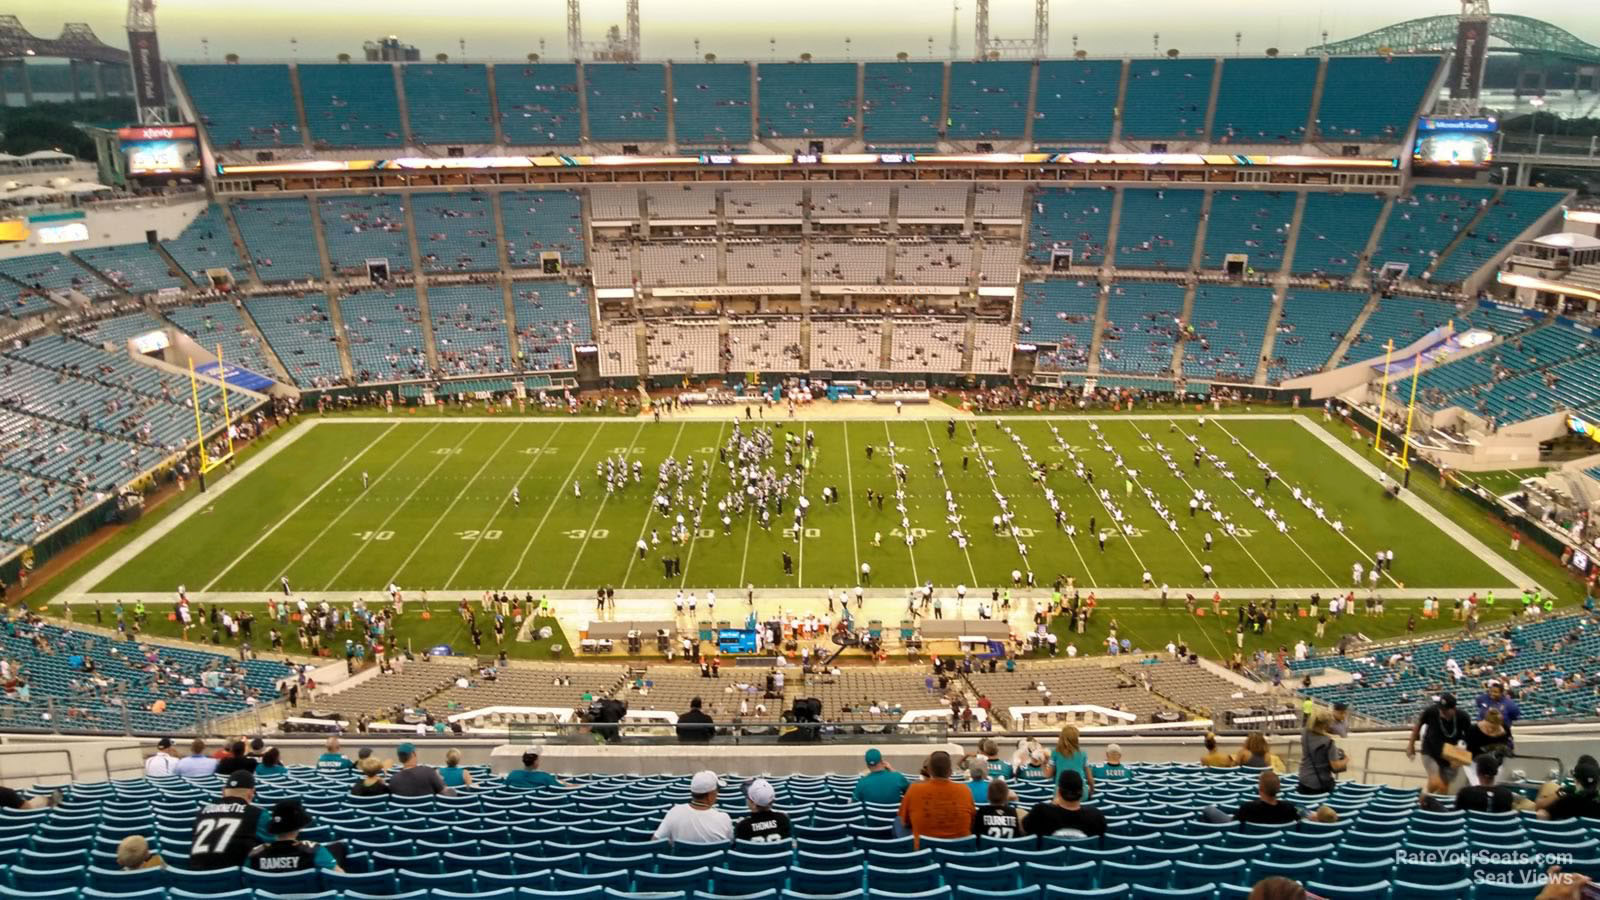 Section 410 at TIAA Bank Field